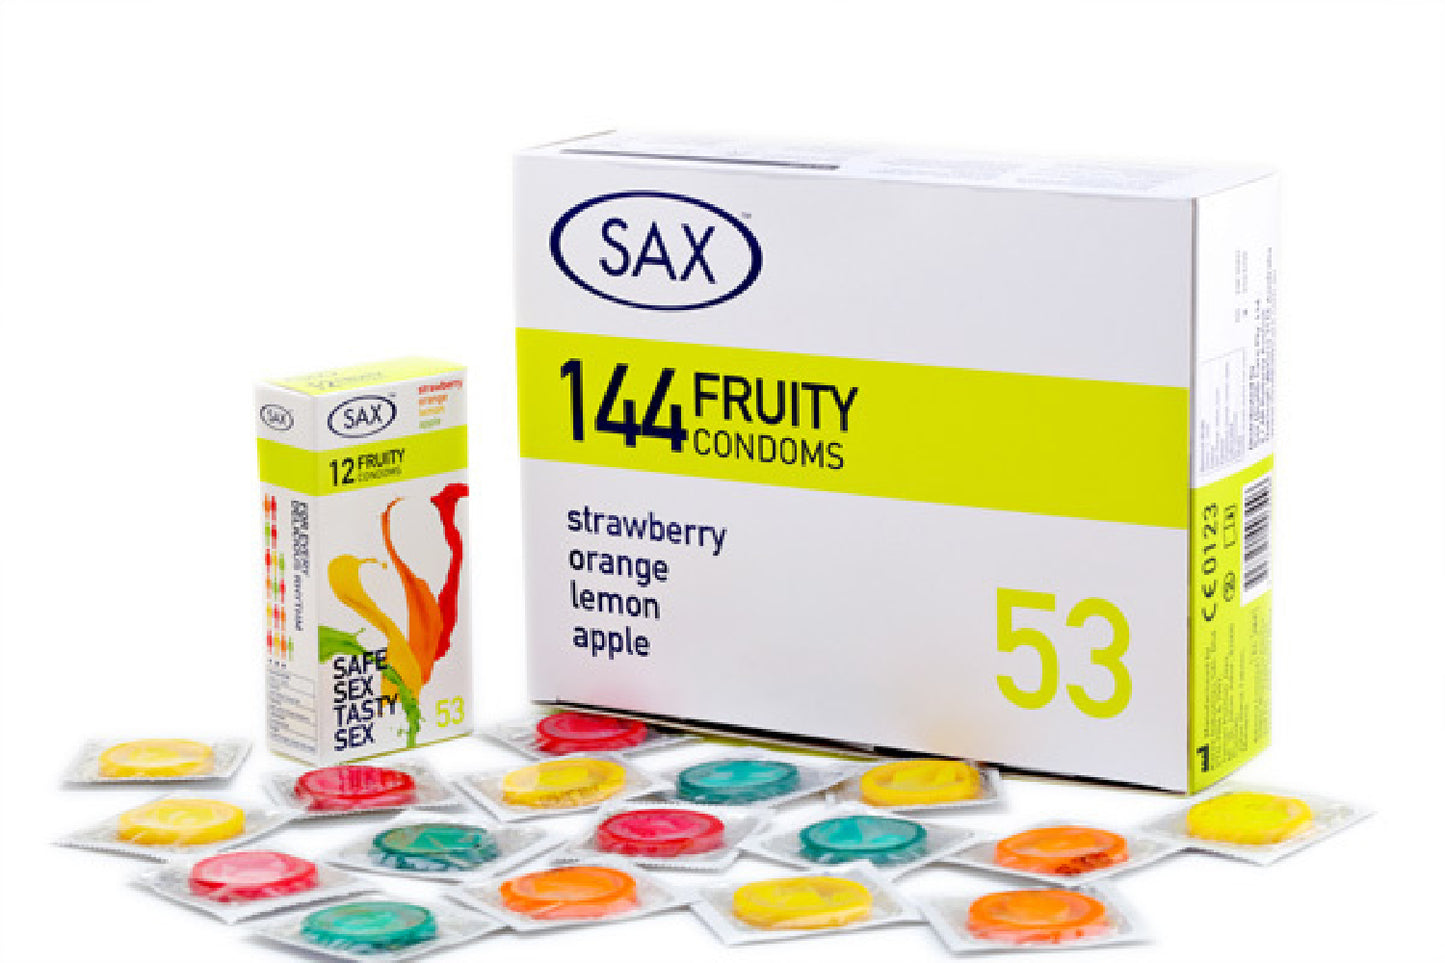 Sax Fruity 144's - One Stop Adult Shop